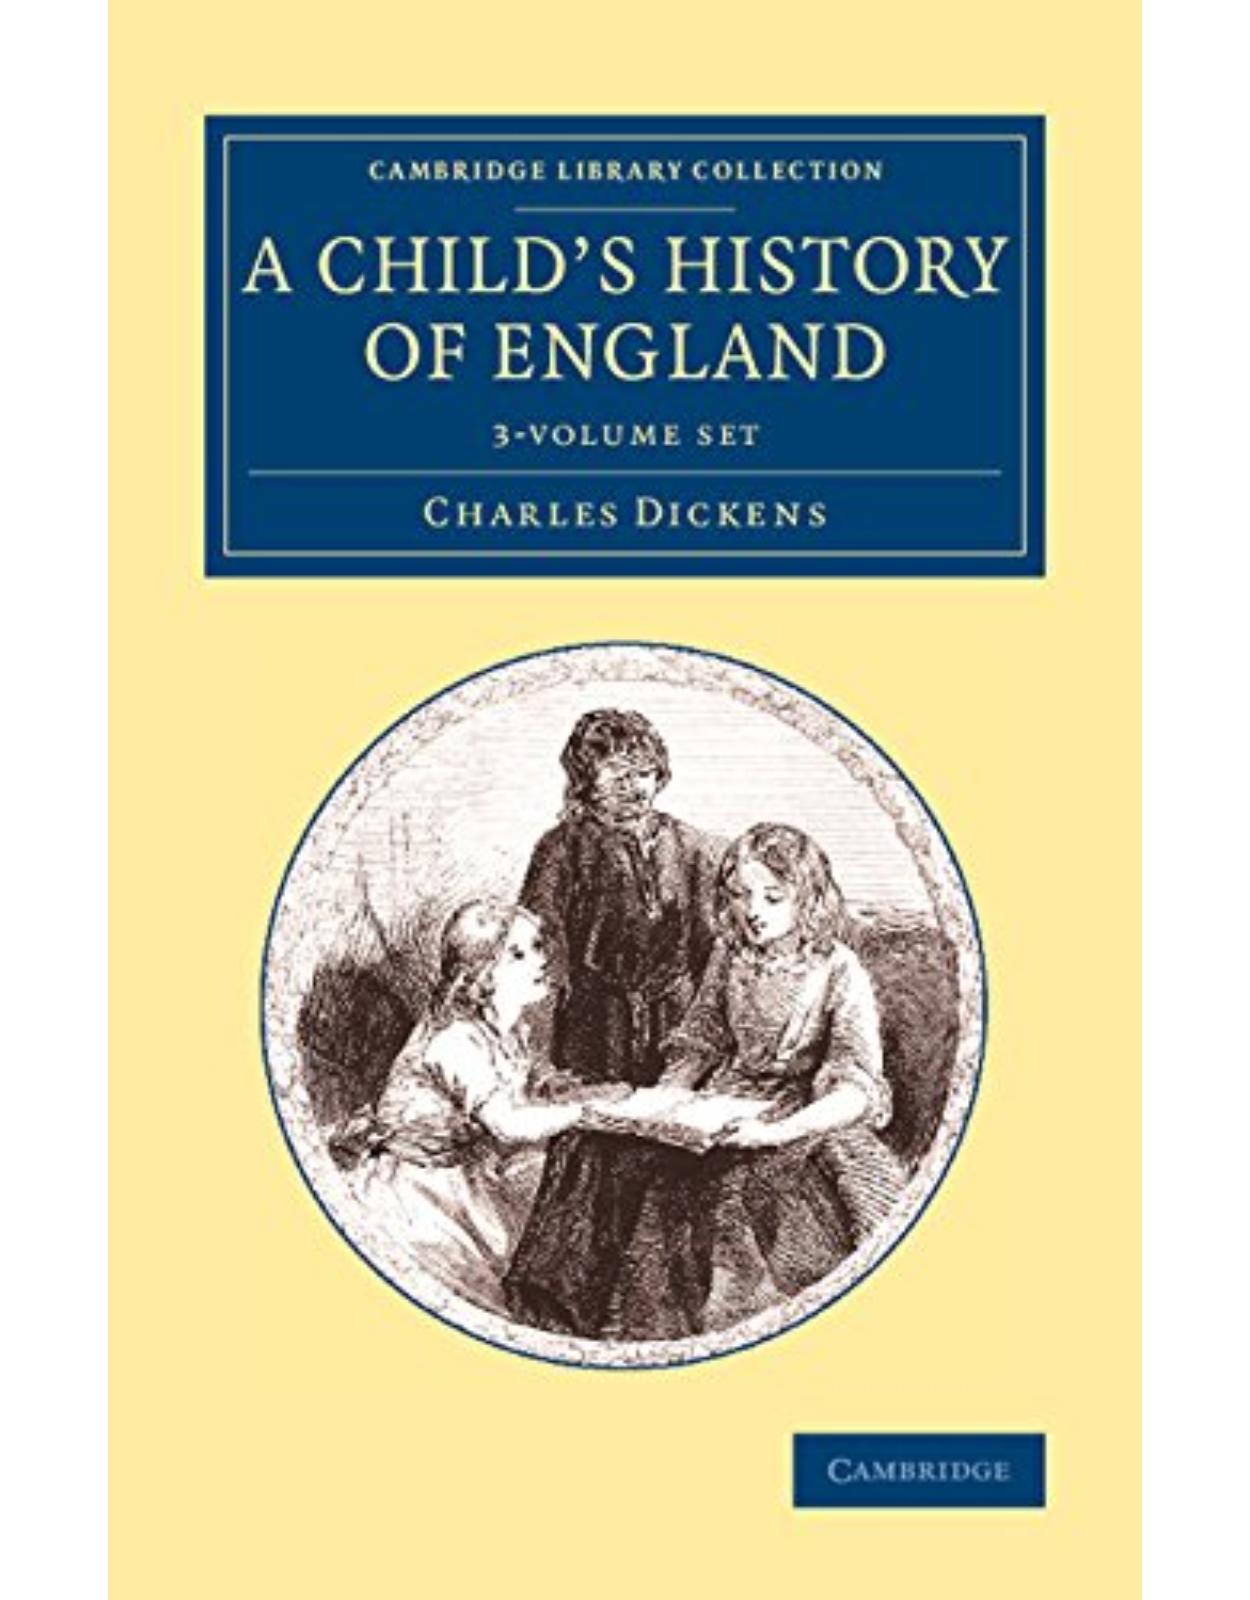 A Child's History of England 3 Volume Set